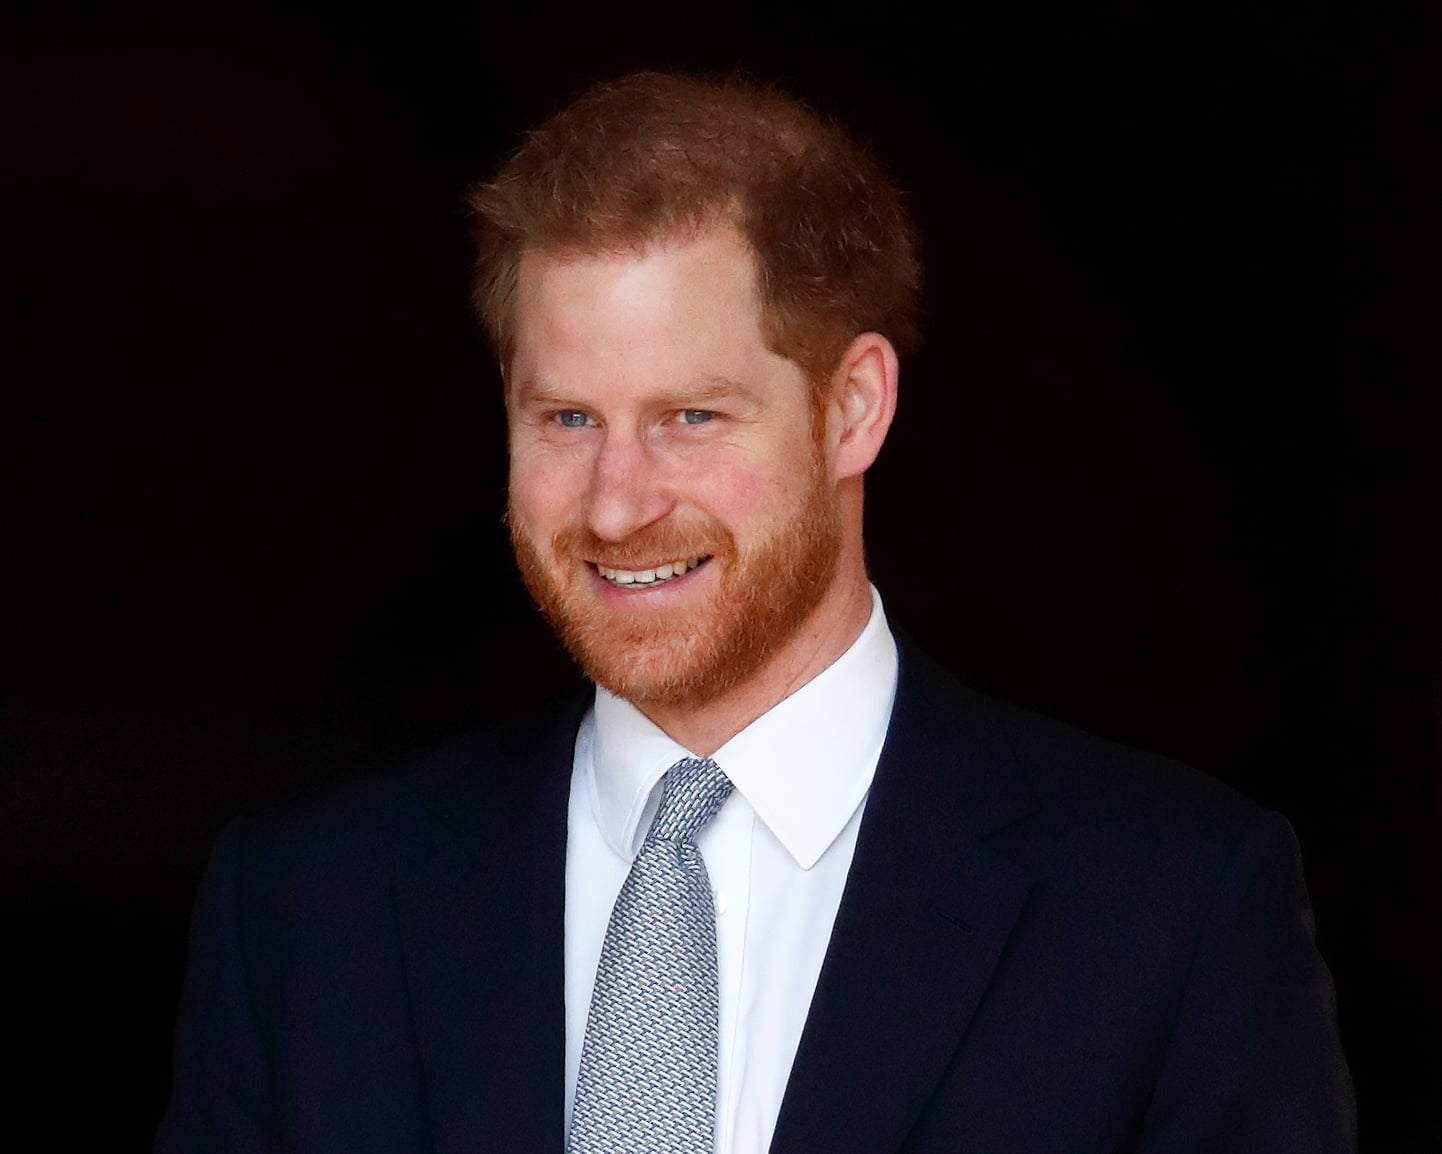 LONDON, UNITED KINGDOM - JANUARY 16: (EMBARGOED FOR PUBLICATION IN UK NEWSPAPERS UNTIL 24 HOURS AFTER CREATE DATE AND TIME) Prince Harry, Duke of Sussex hosts the Rugby League World Cup 2021 draws for the men's, women's and wheelchair tournaments at Buckingham Palace on January 16, 2020 in London, England. (Photo by Max Mumby/Indigo/Getty Images)